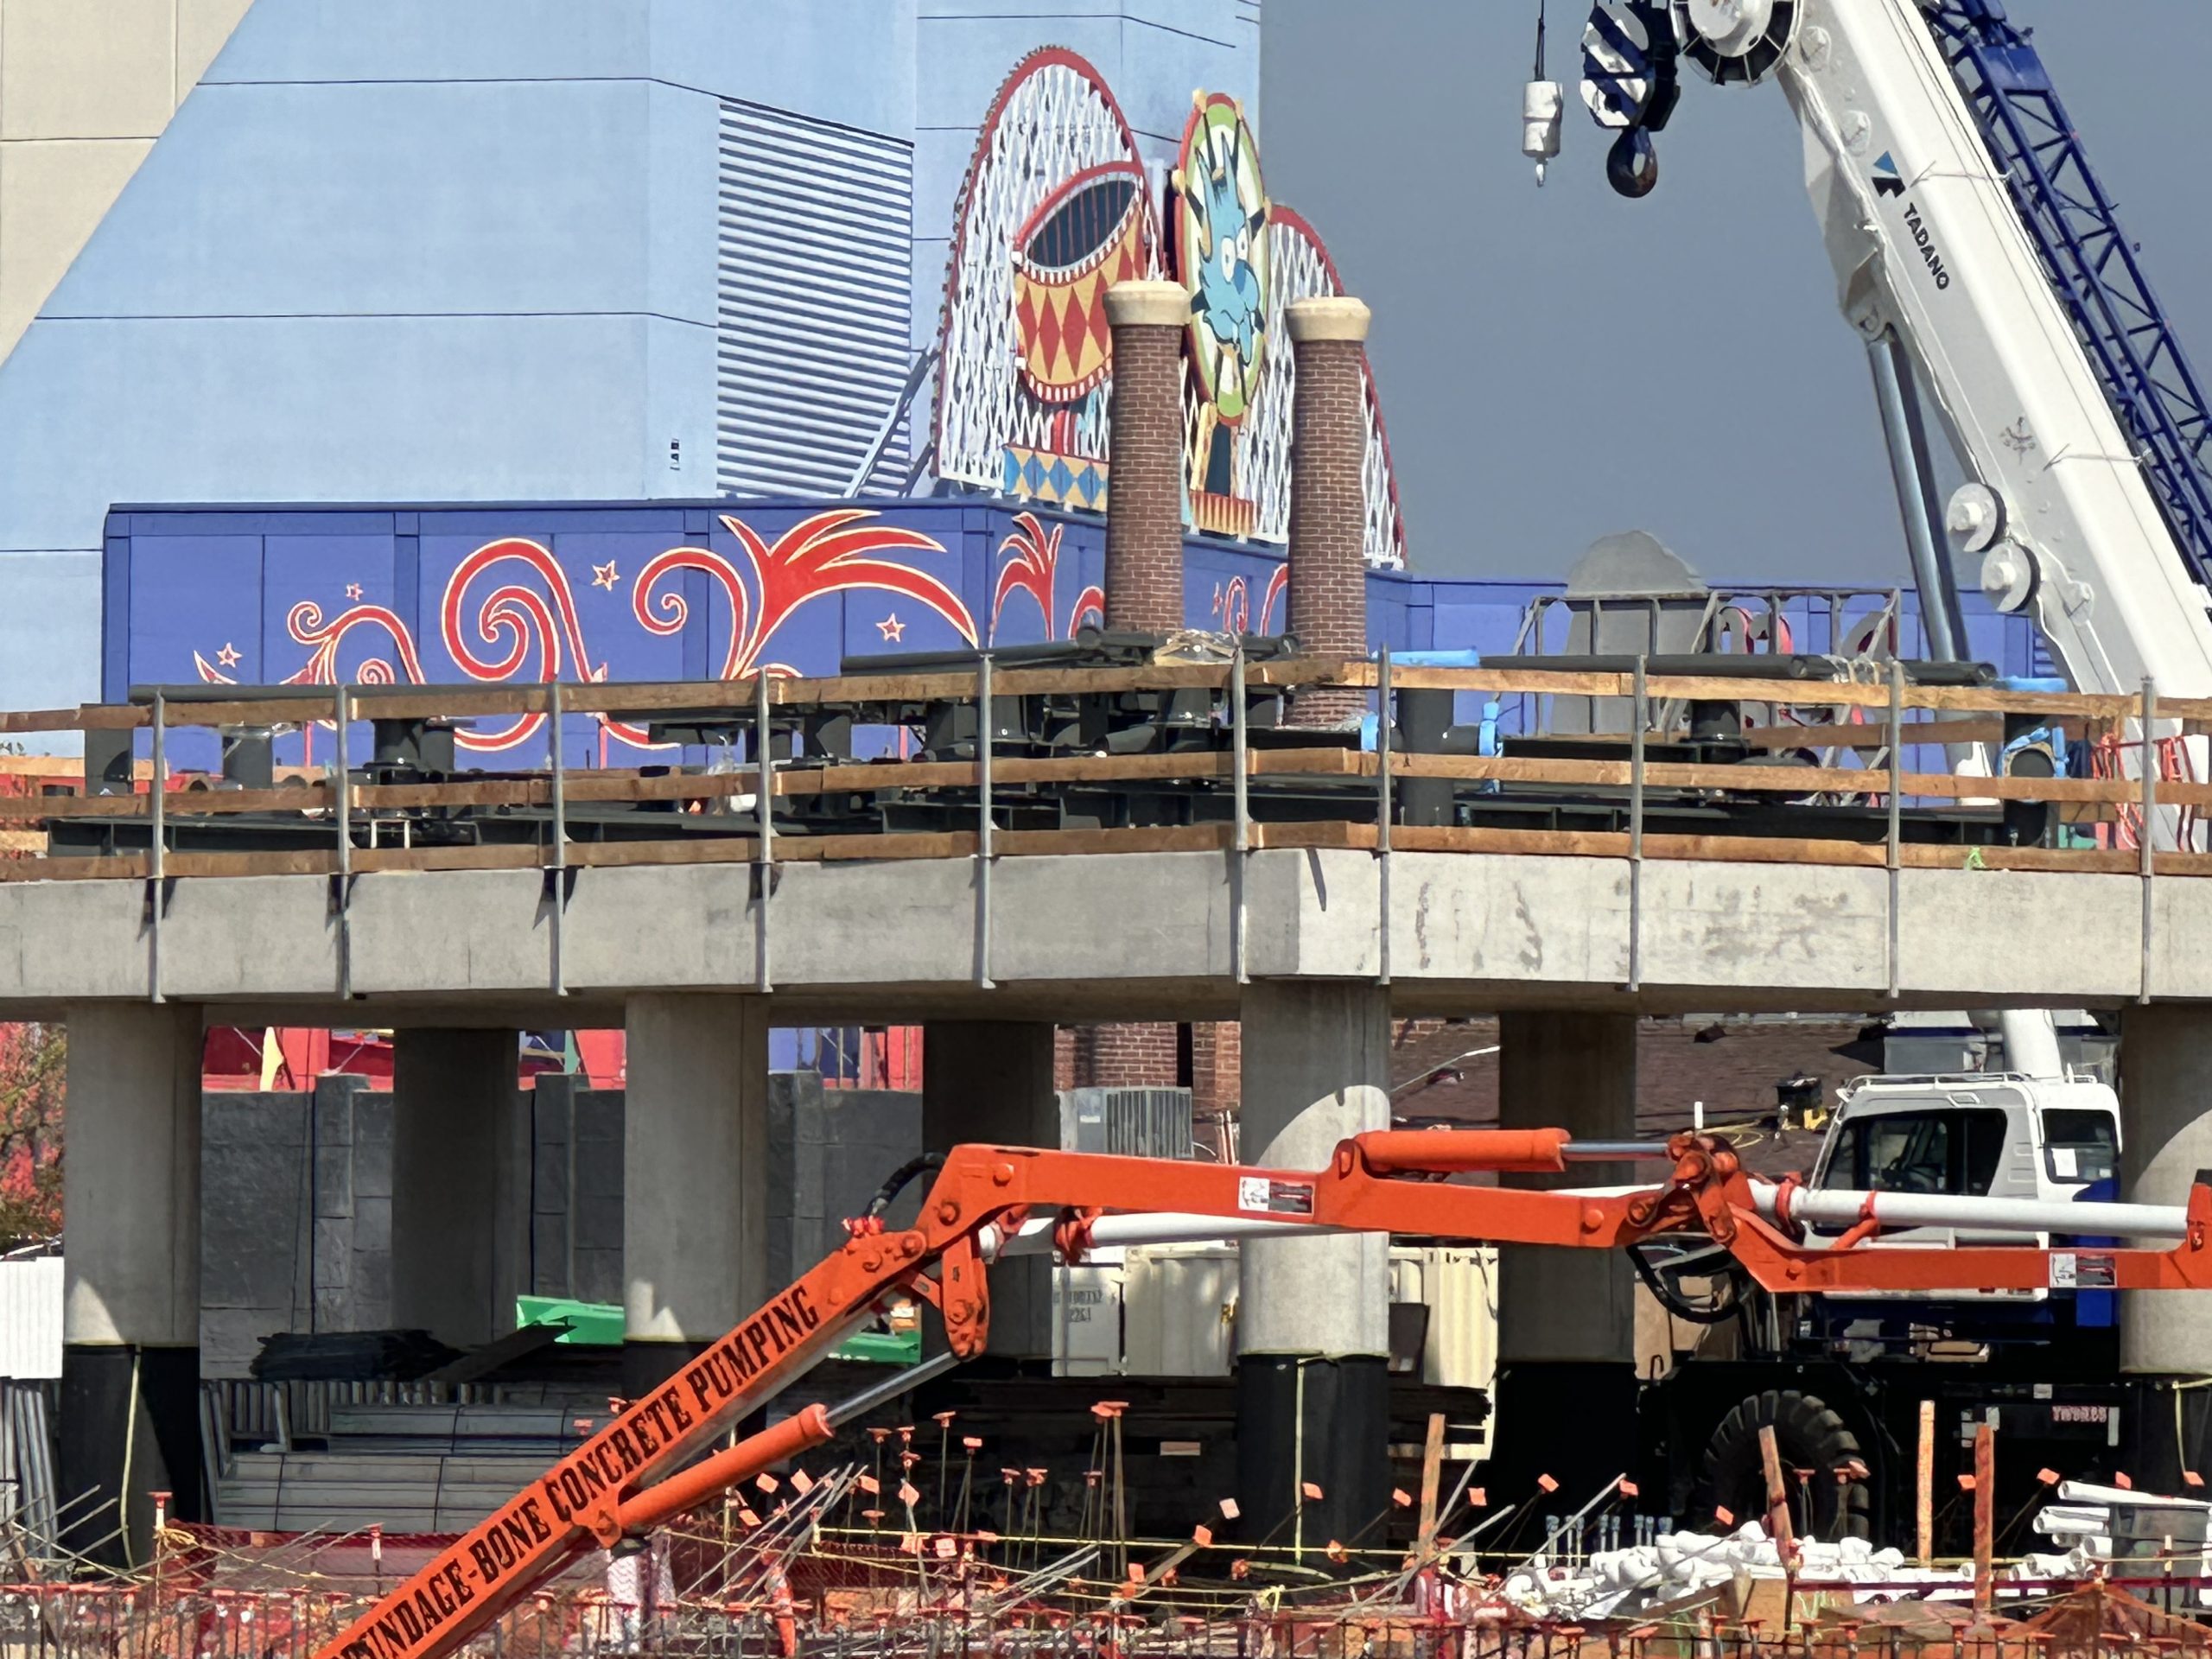 Track installation begins on Fast & Furious Coaster at Universal Studios Hollywood